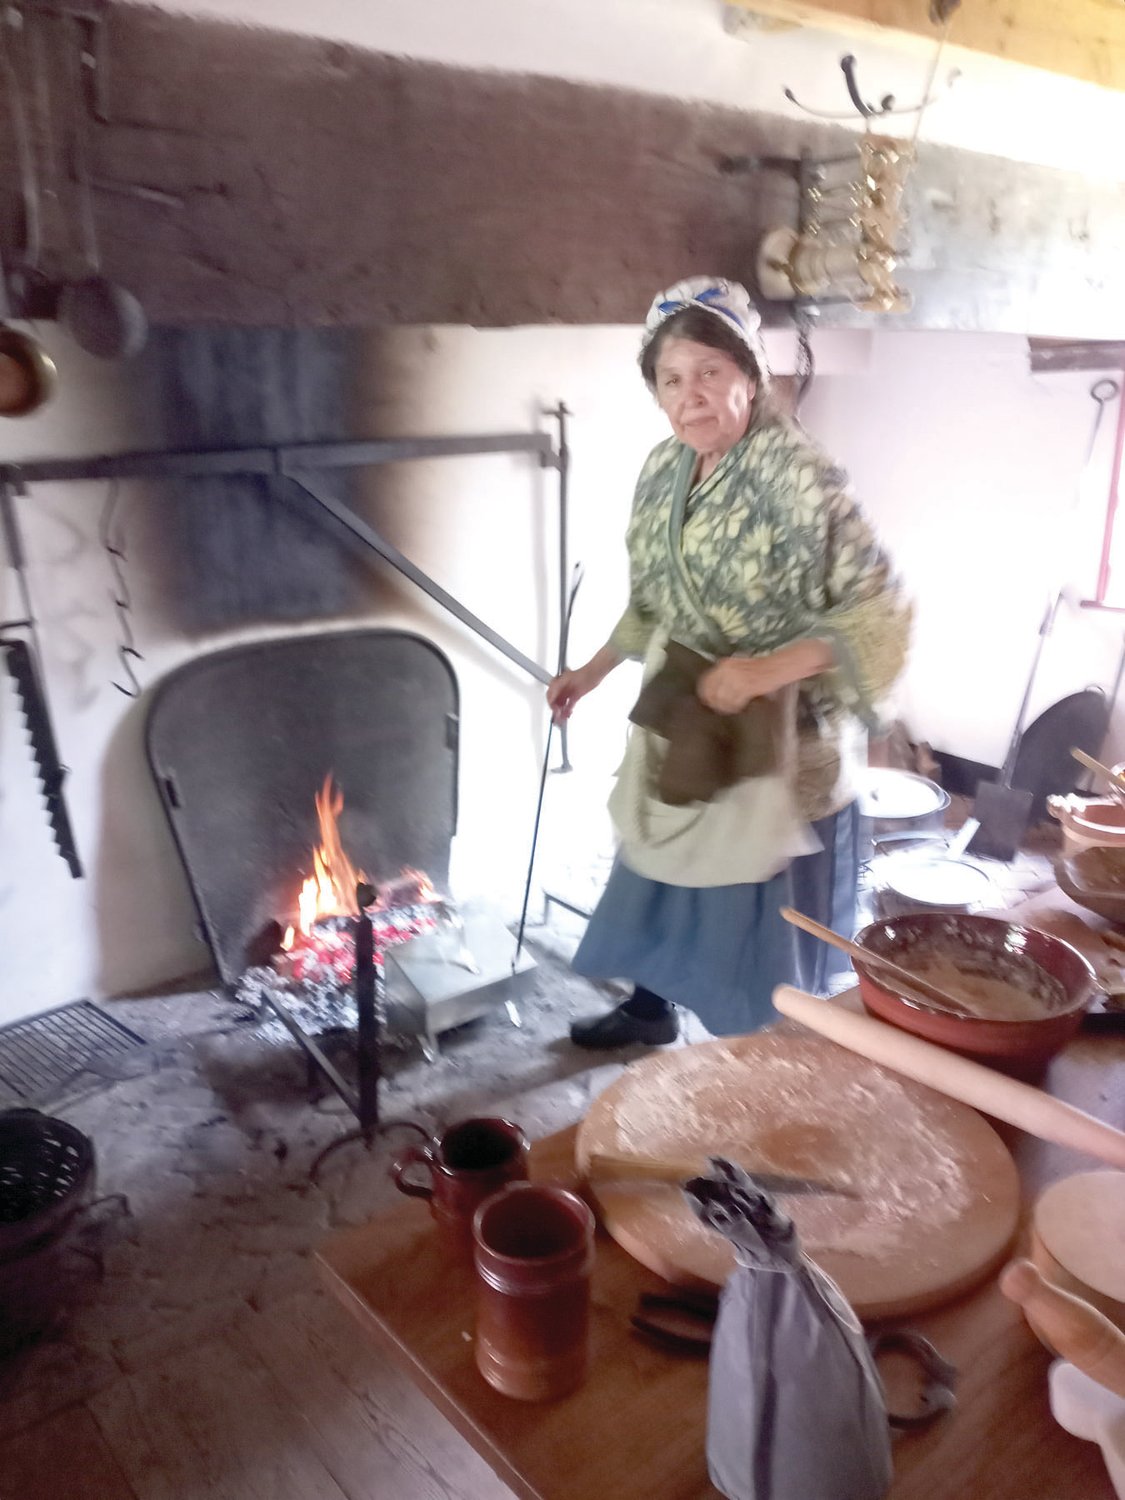 Susan McLellan Plaisted cooks on the open fires at the Moland House.